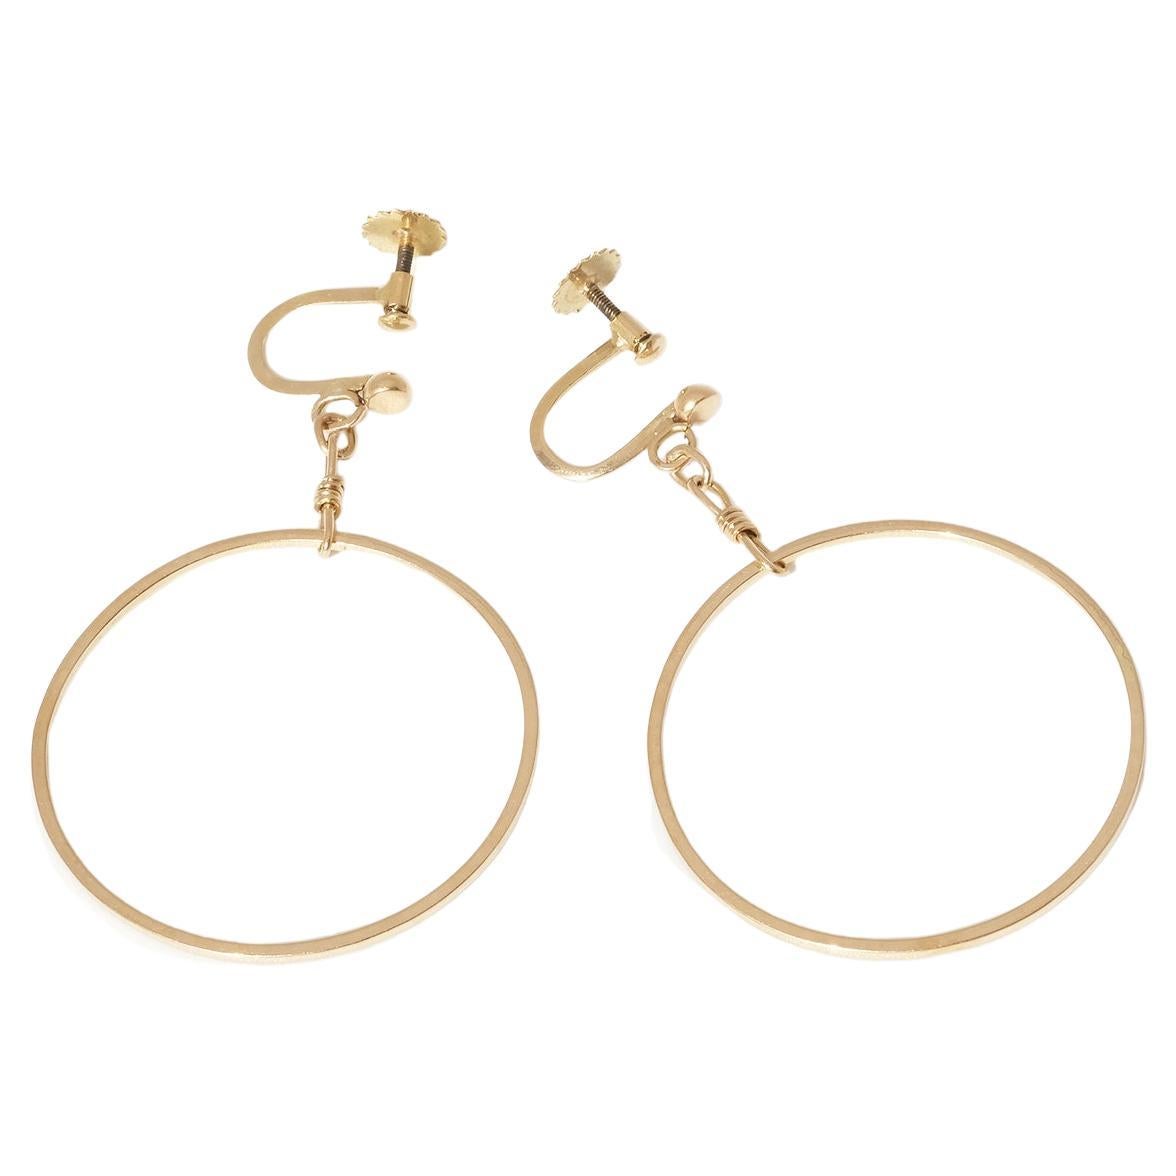 These 18 karat gold earrings are circle-shaped whilst the bar itself is rail-shaped instead of being round. They have so called screw backs, like many of the earrings had during the early 1900s through the 1950s. Between the pendant and the screw